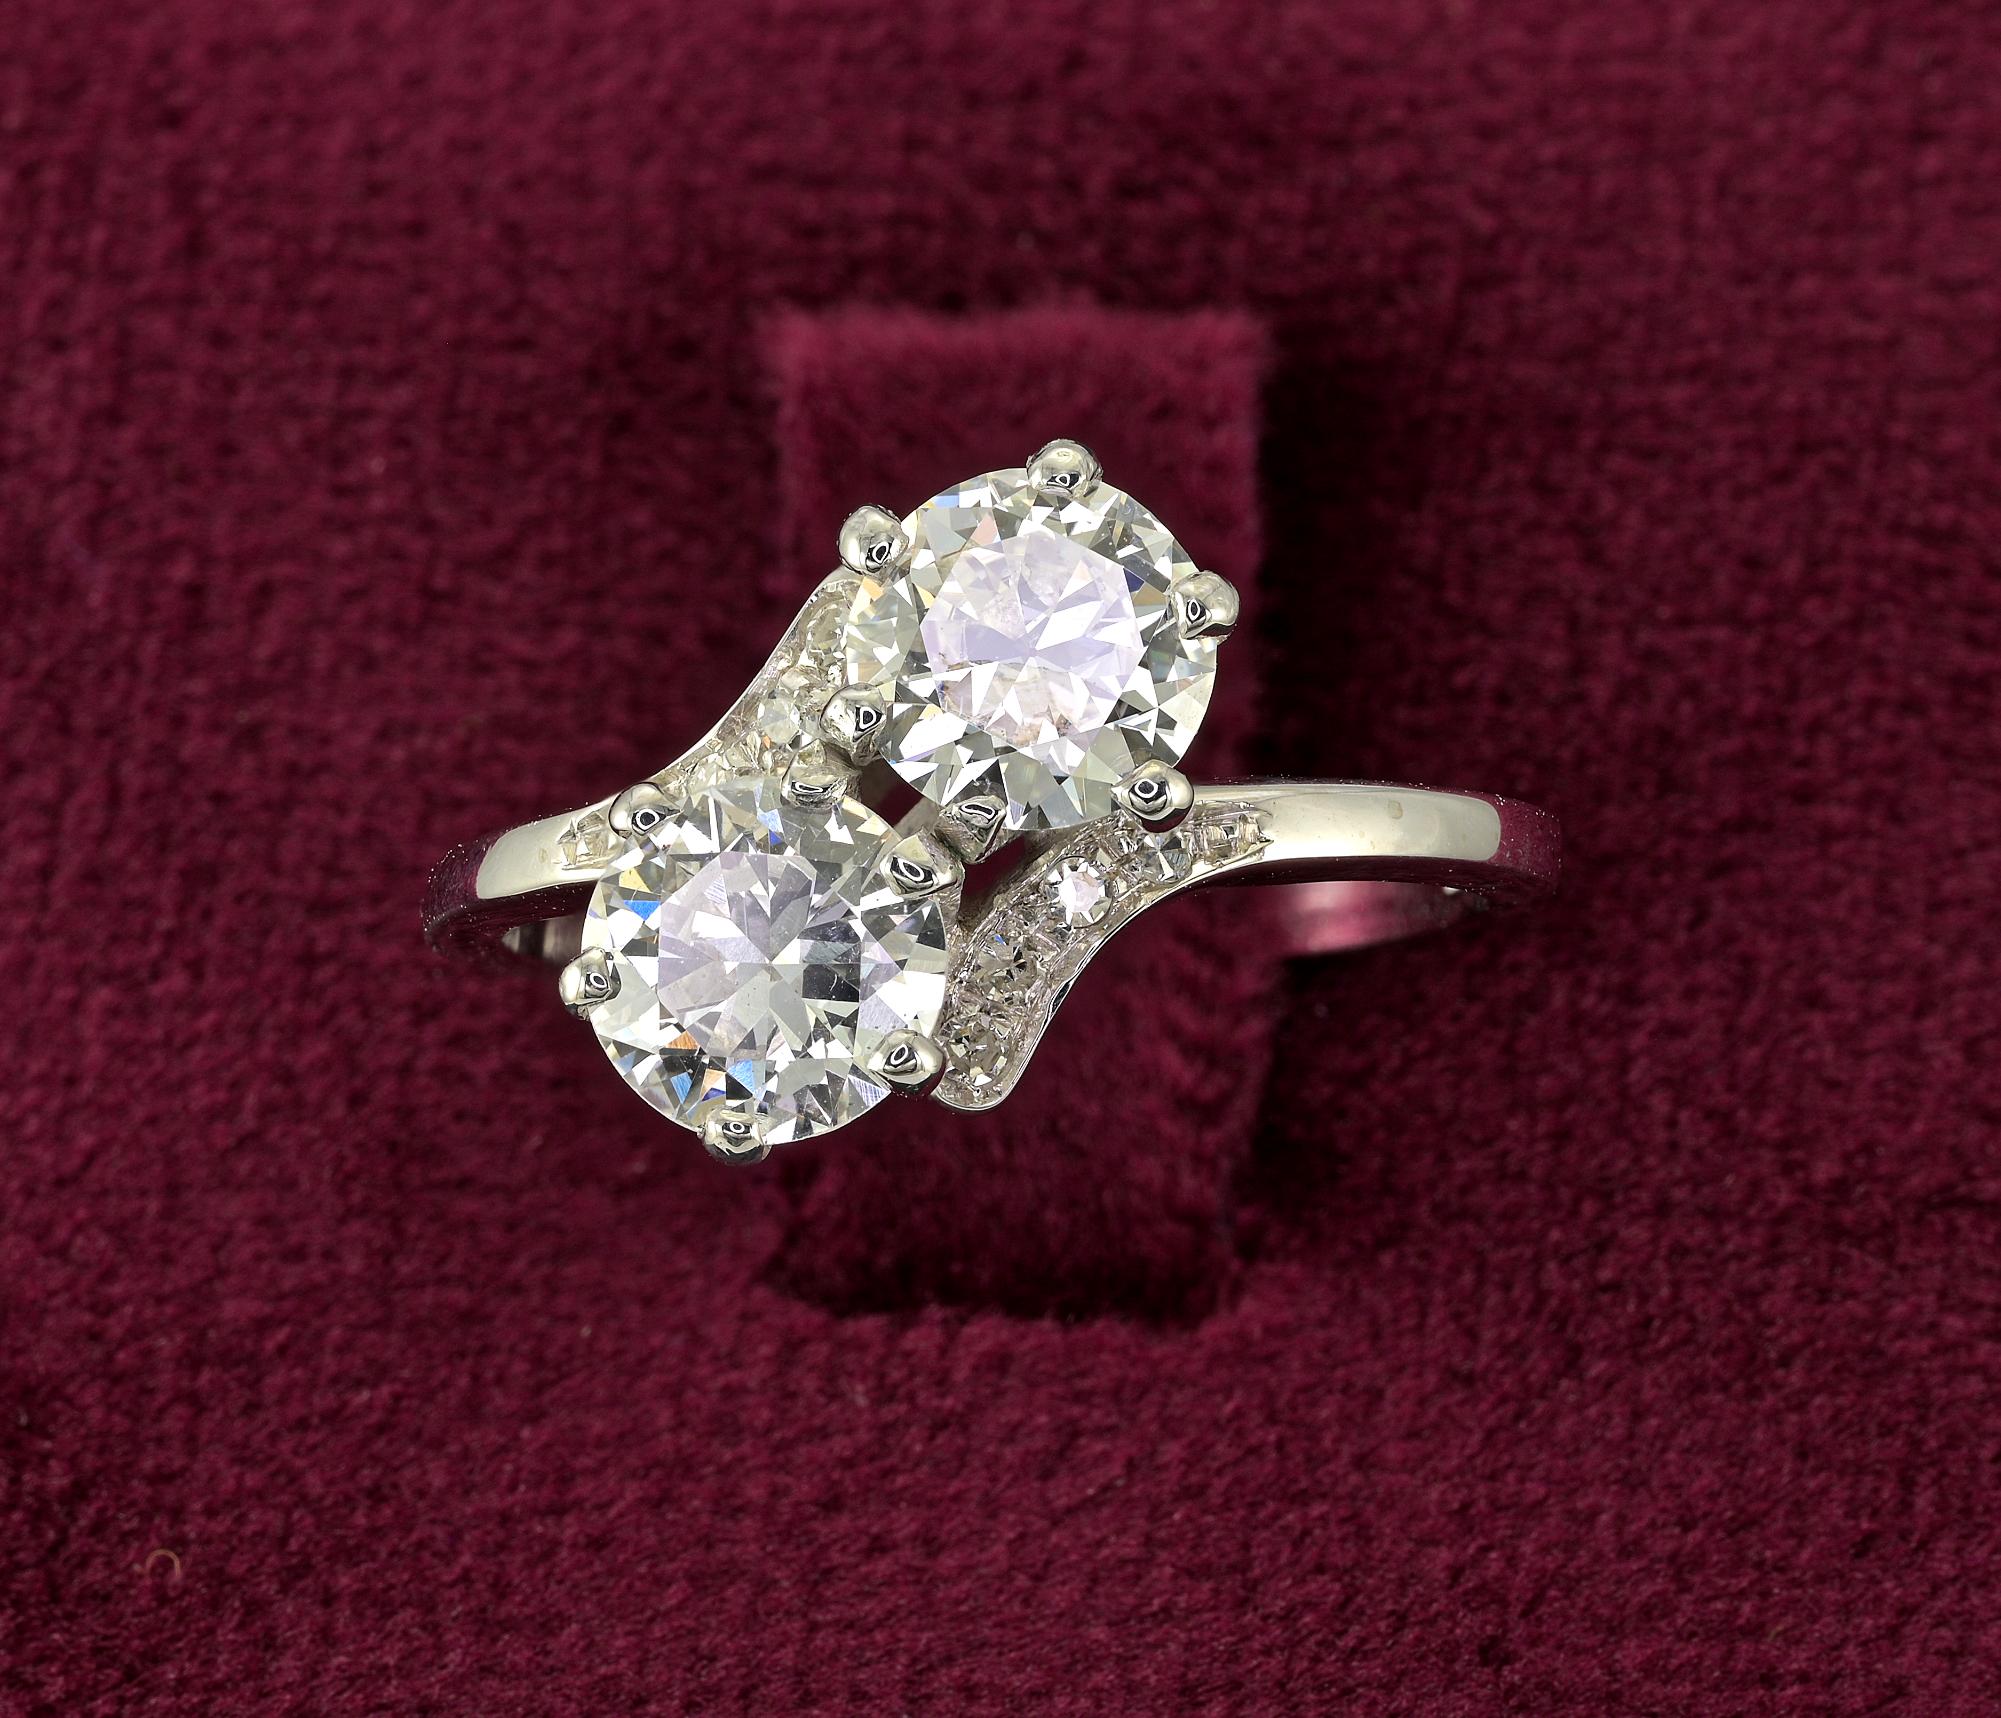 Dating back to the last century 1940, this classic double dazzler, hand fabricated in 18K white gold, features a pair of bright and shining old European-cut Diamonds, together totaling 1.55 carats – .75 Ct for one .76 Ct for the other
The